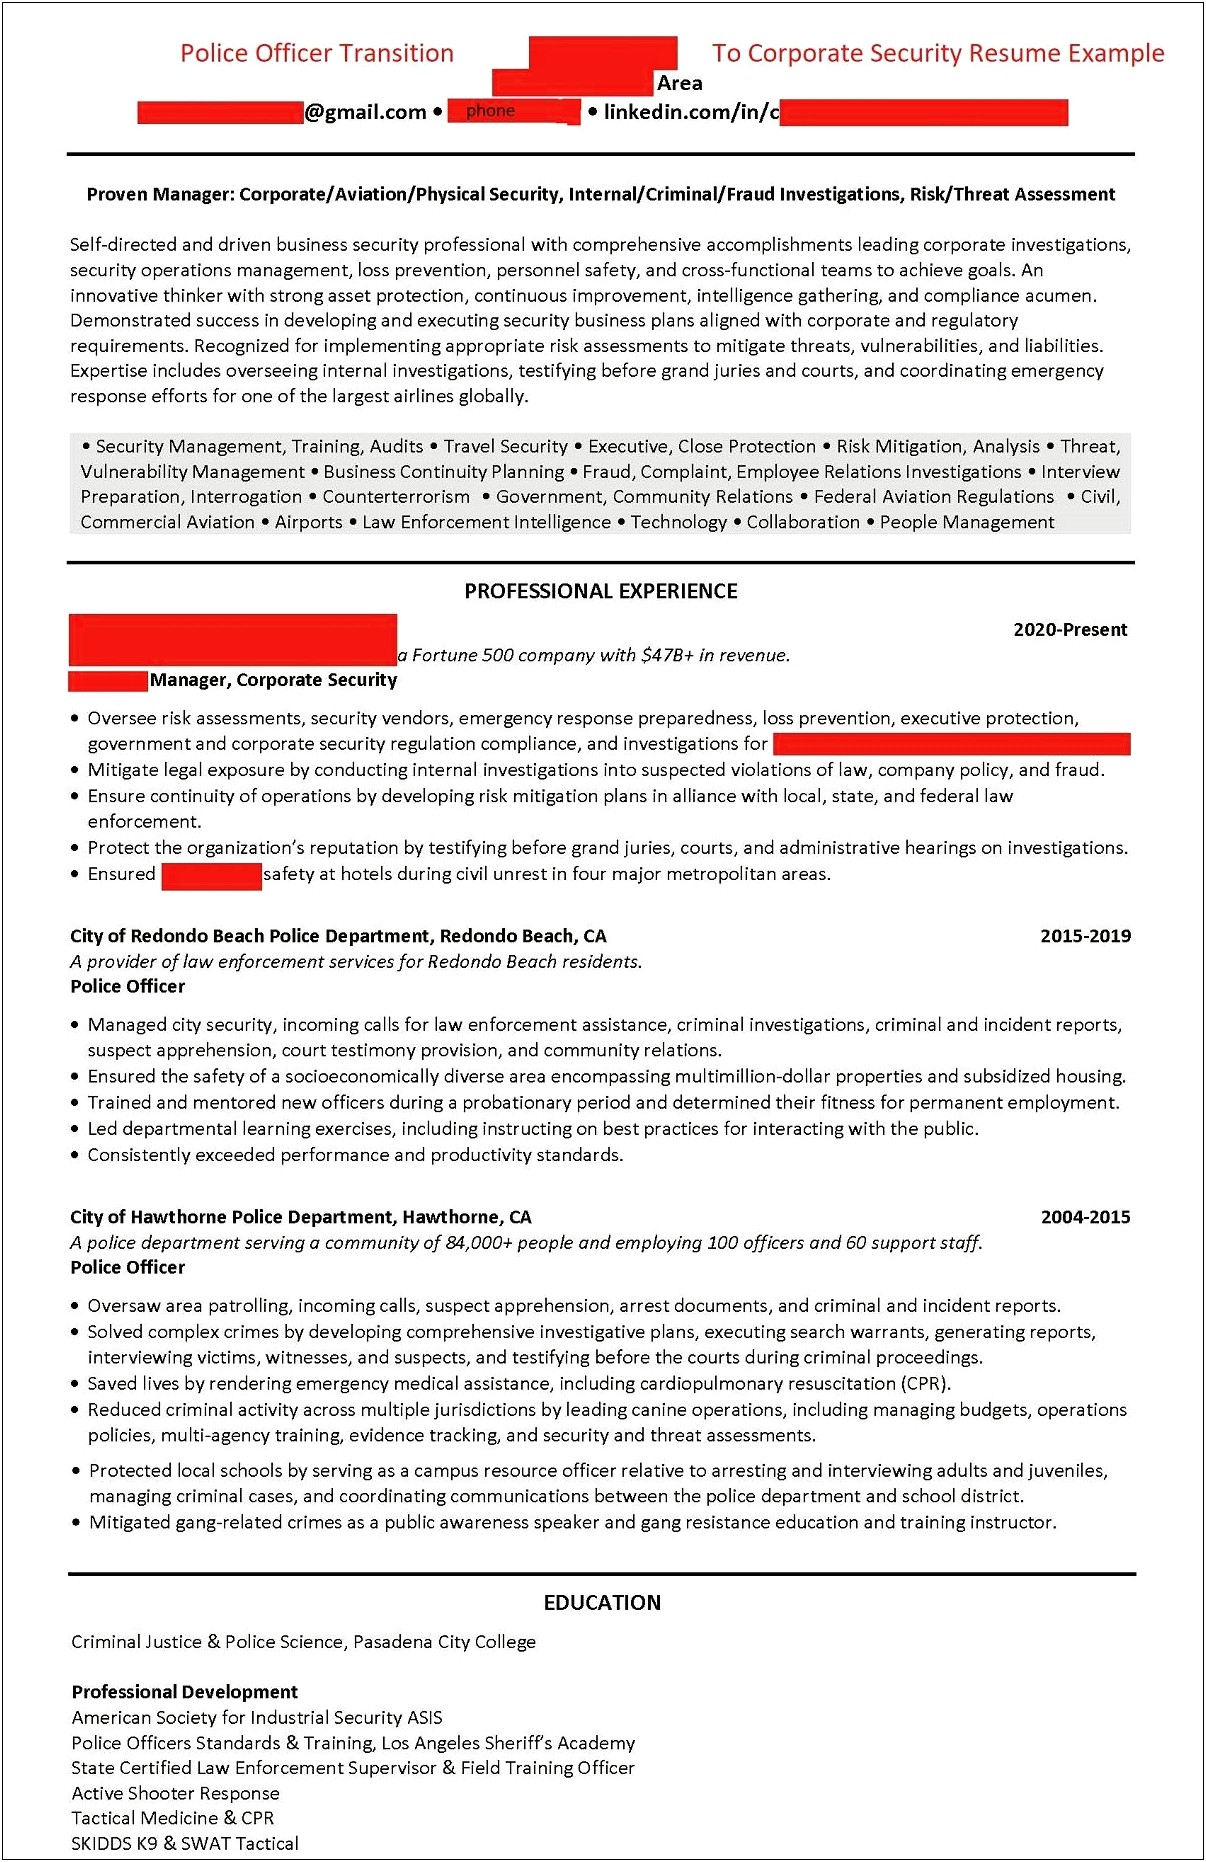 Objective Resume Example For Police Officer